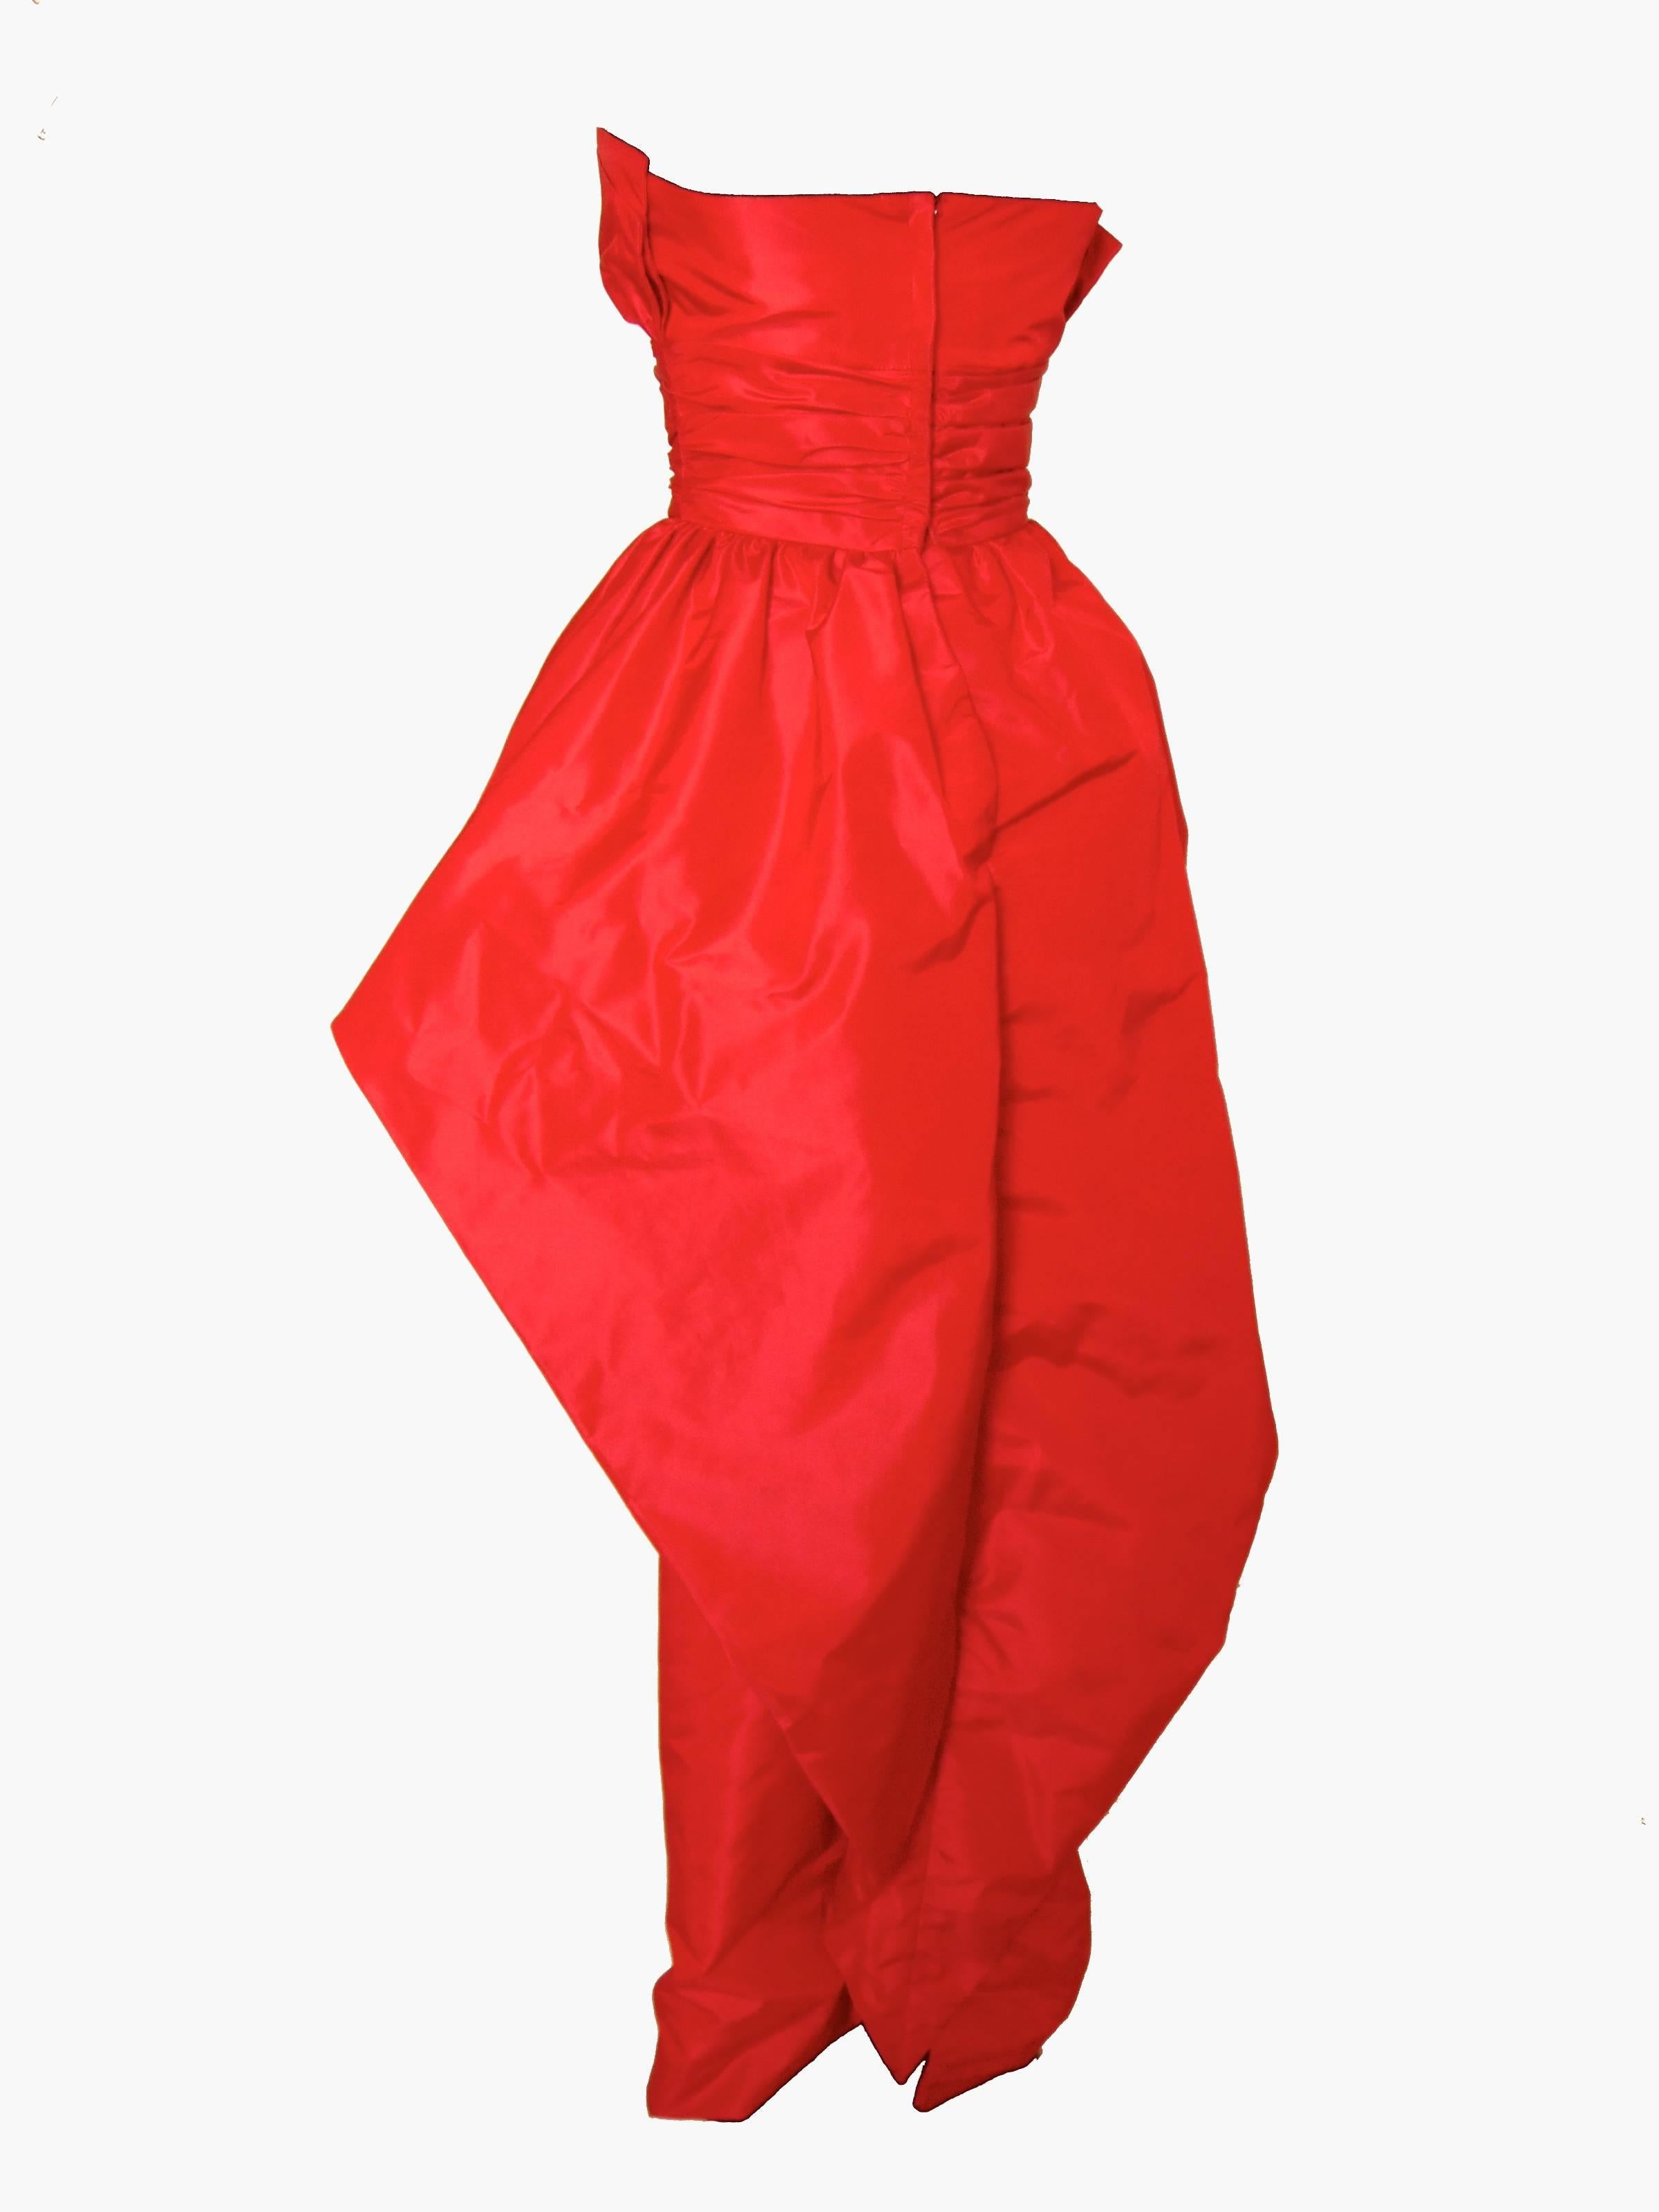 Victor Costa Bright Red Taffeta Evening Gown Strapless Sheath 1970s Size XS 1